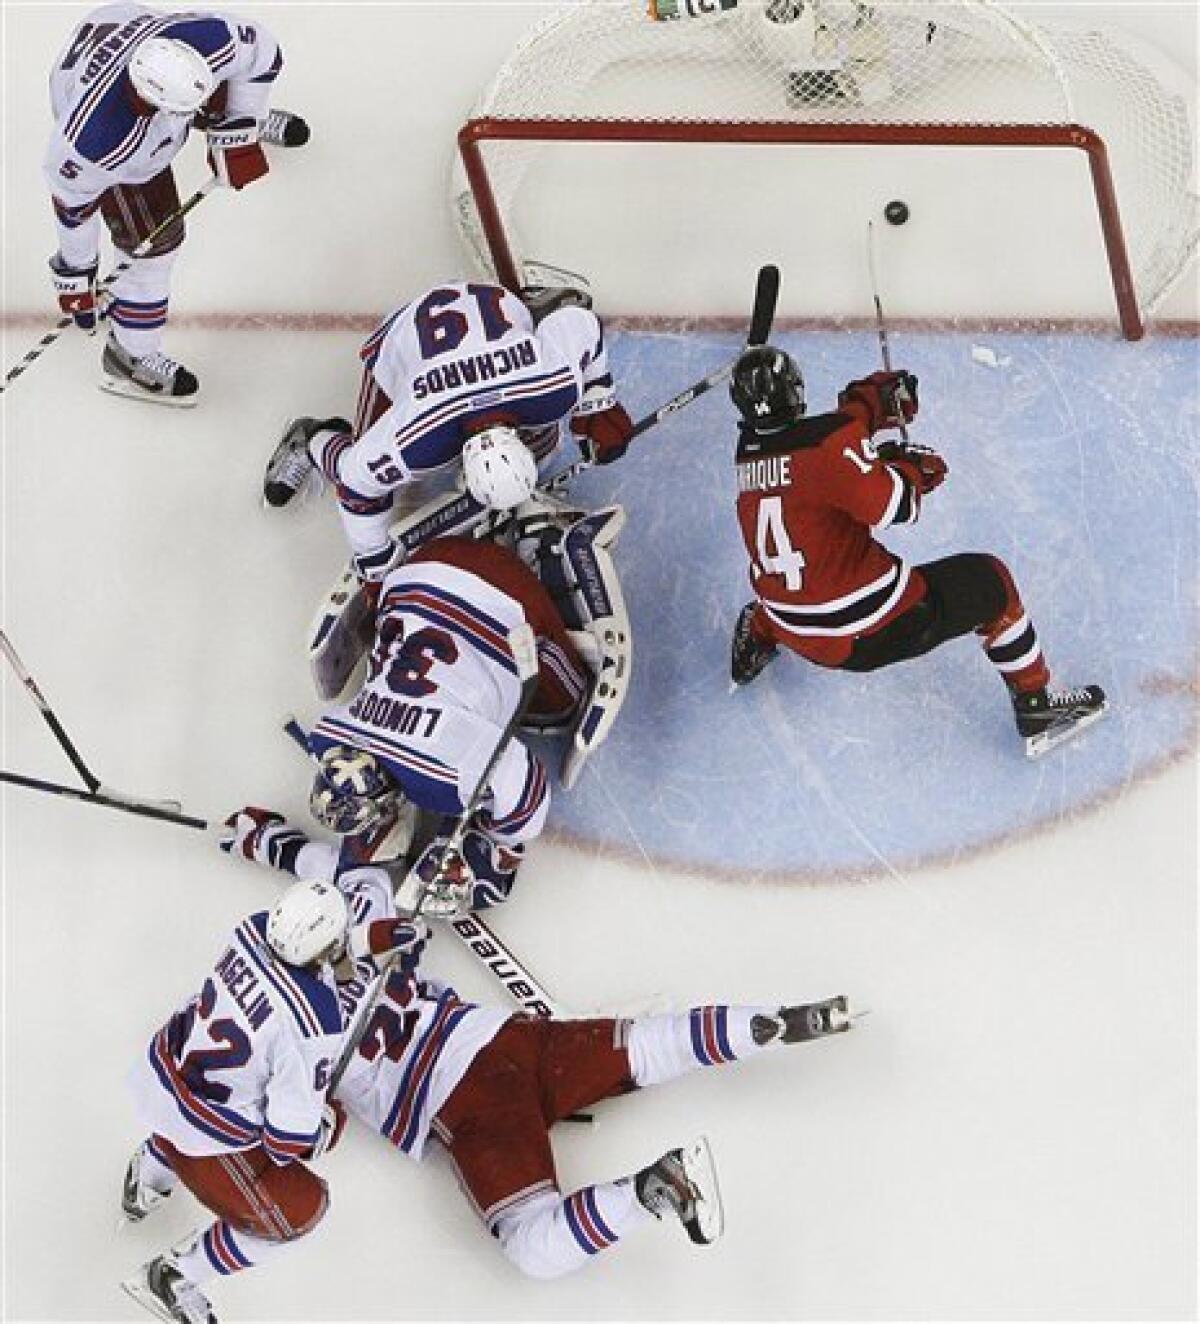 New Jersey Devils advance to Stanley Cup finals